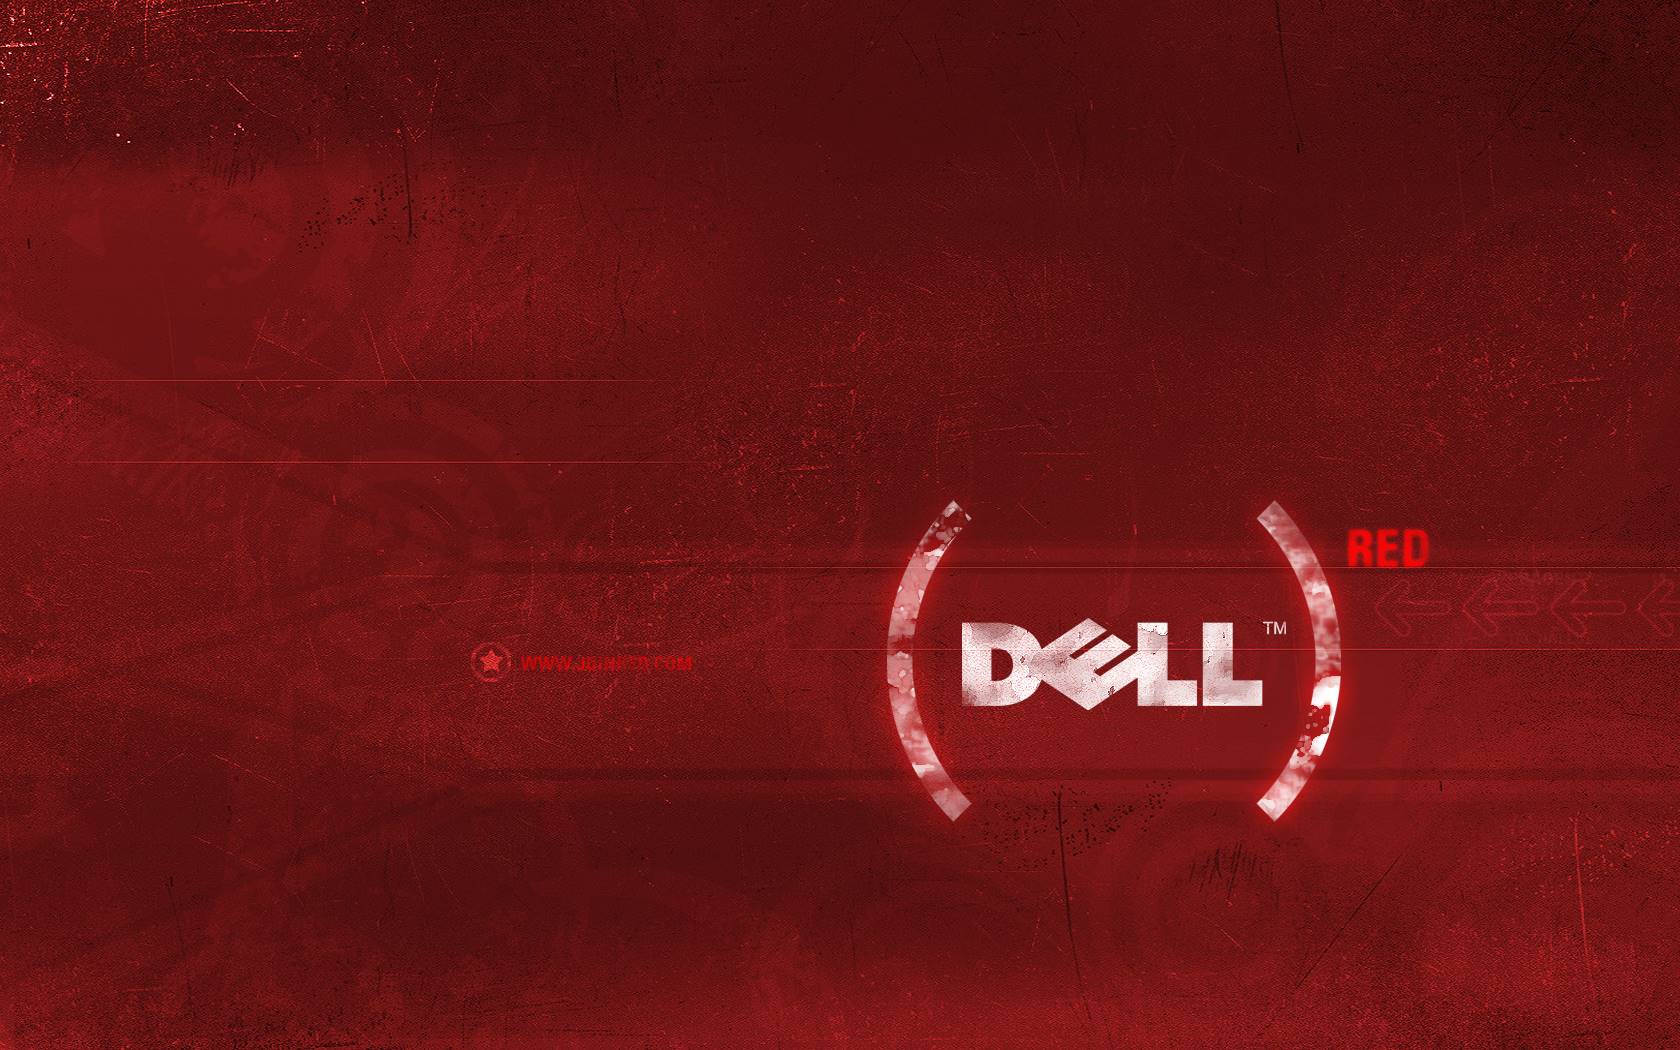 Top Quality Dell Wallpaper